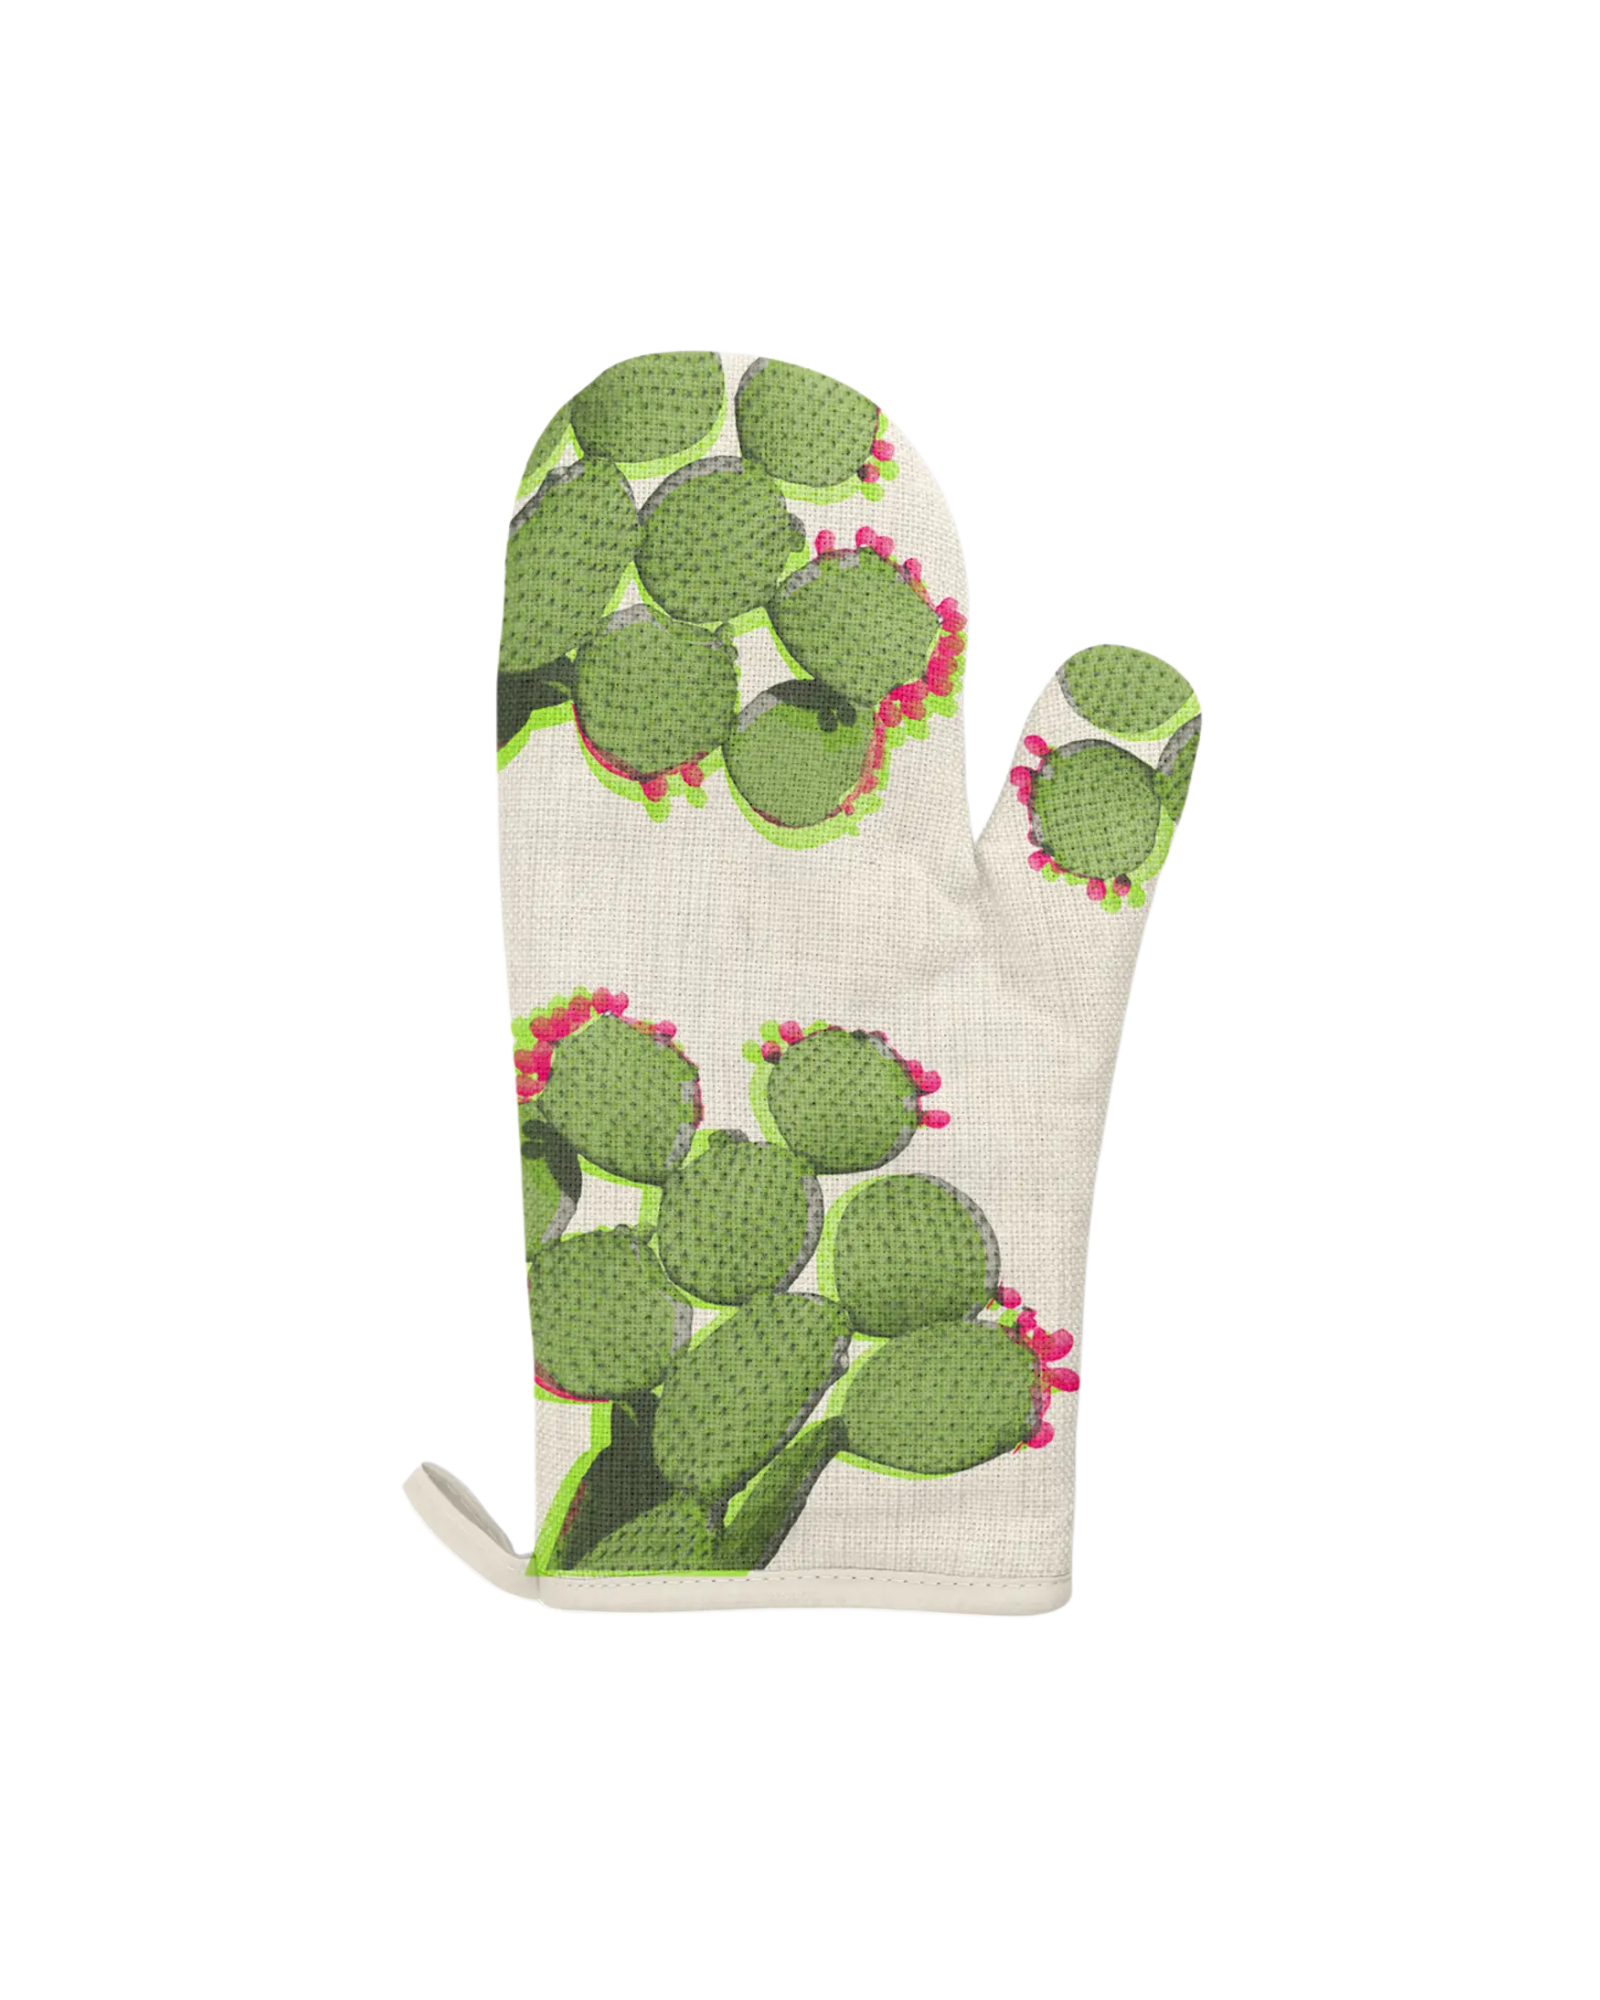 Left handed oven mitt with green prickly pear cactus with pink fruit